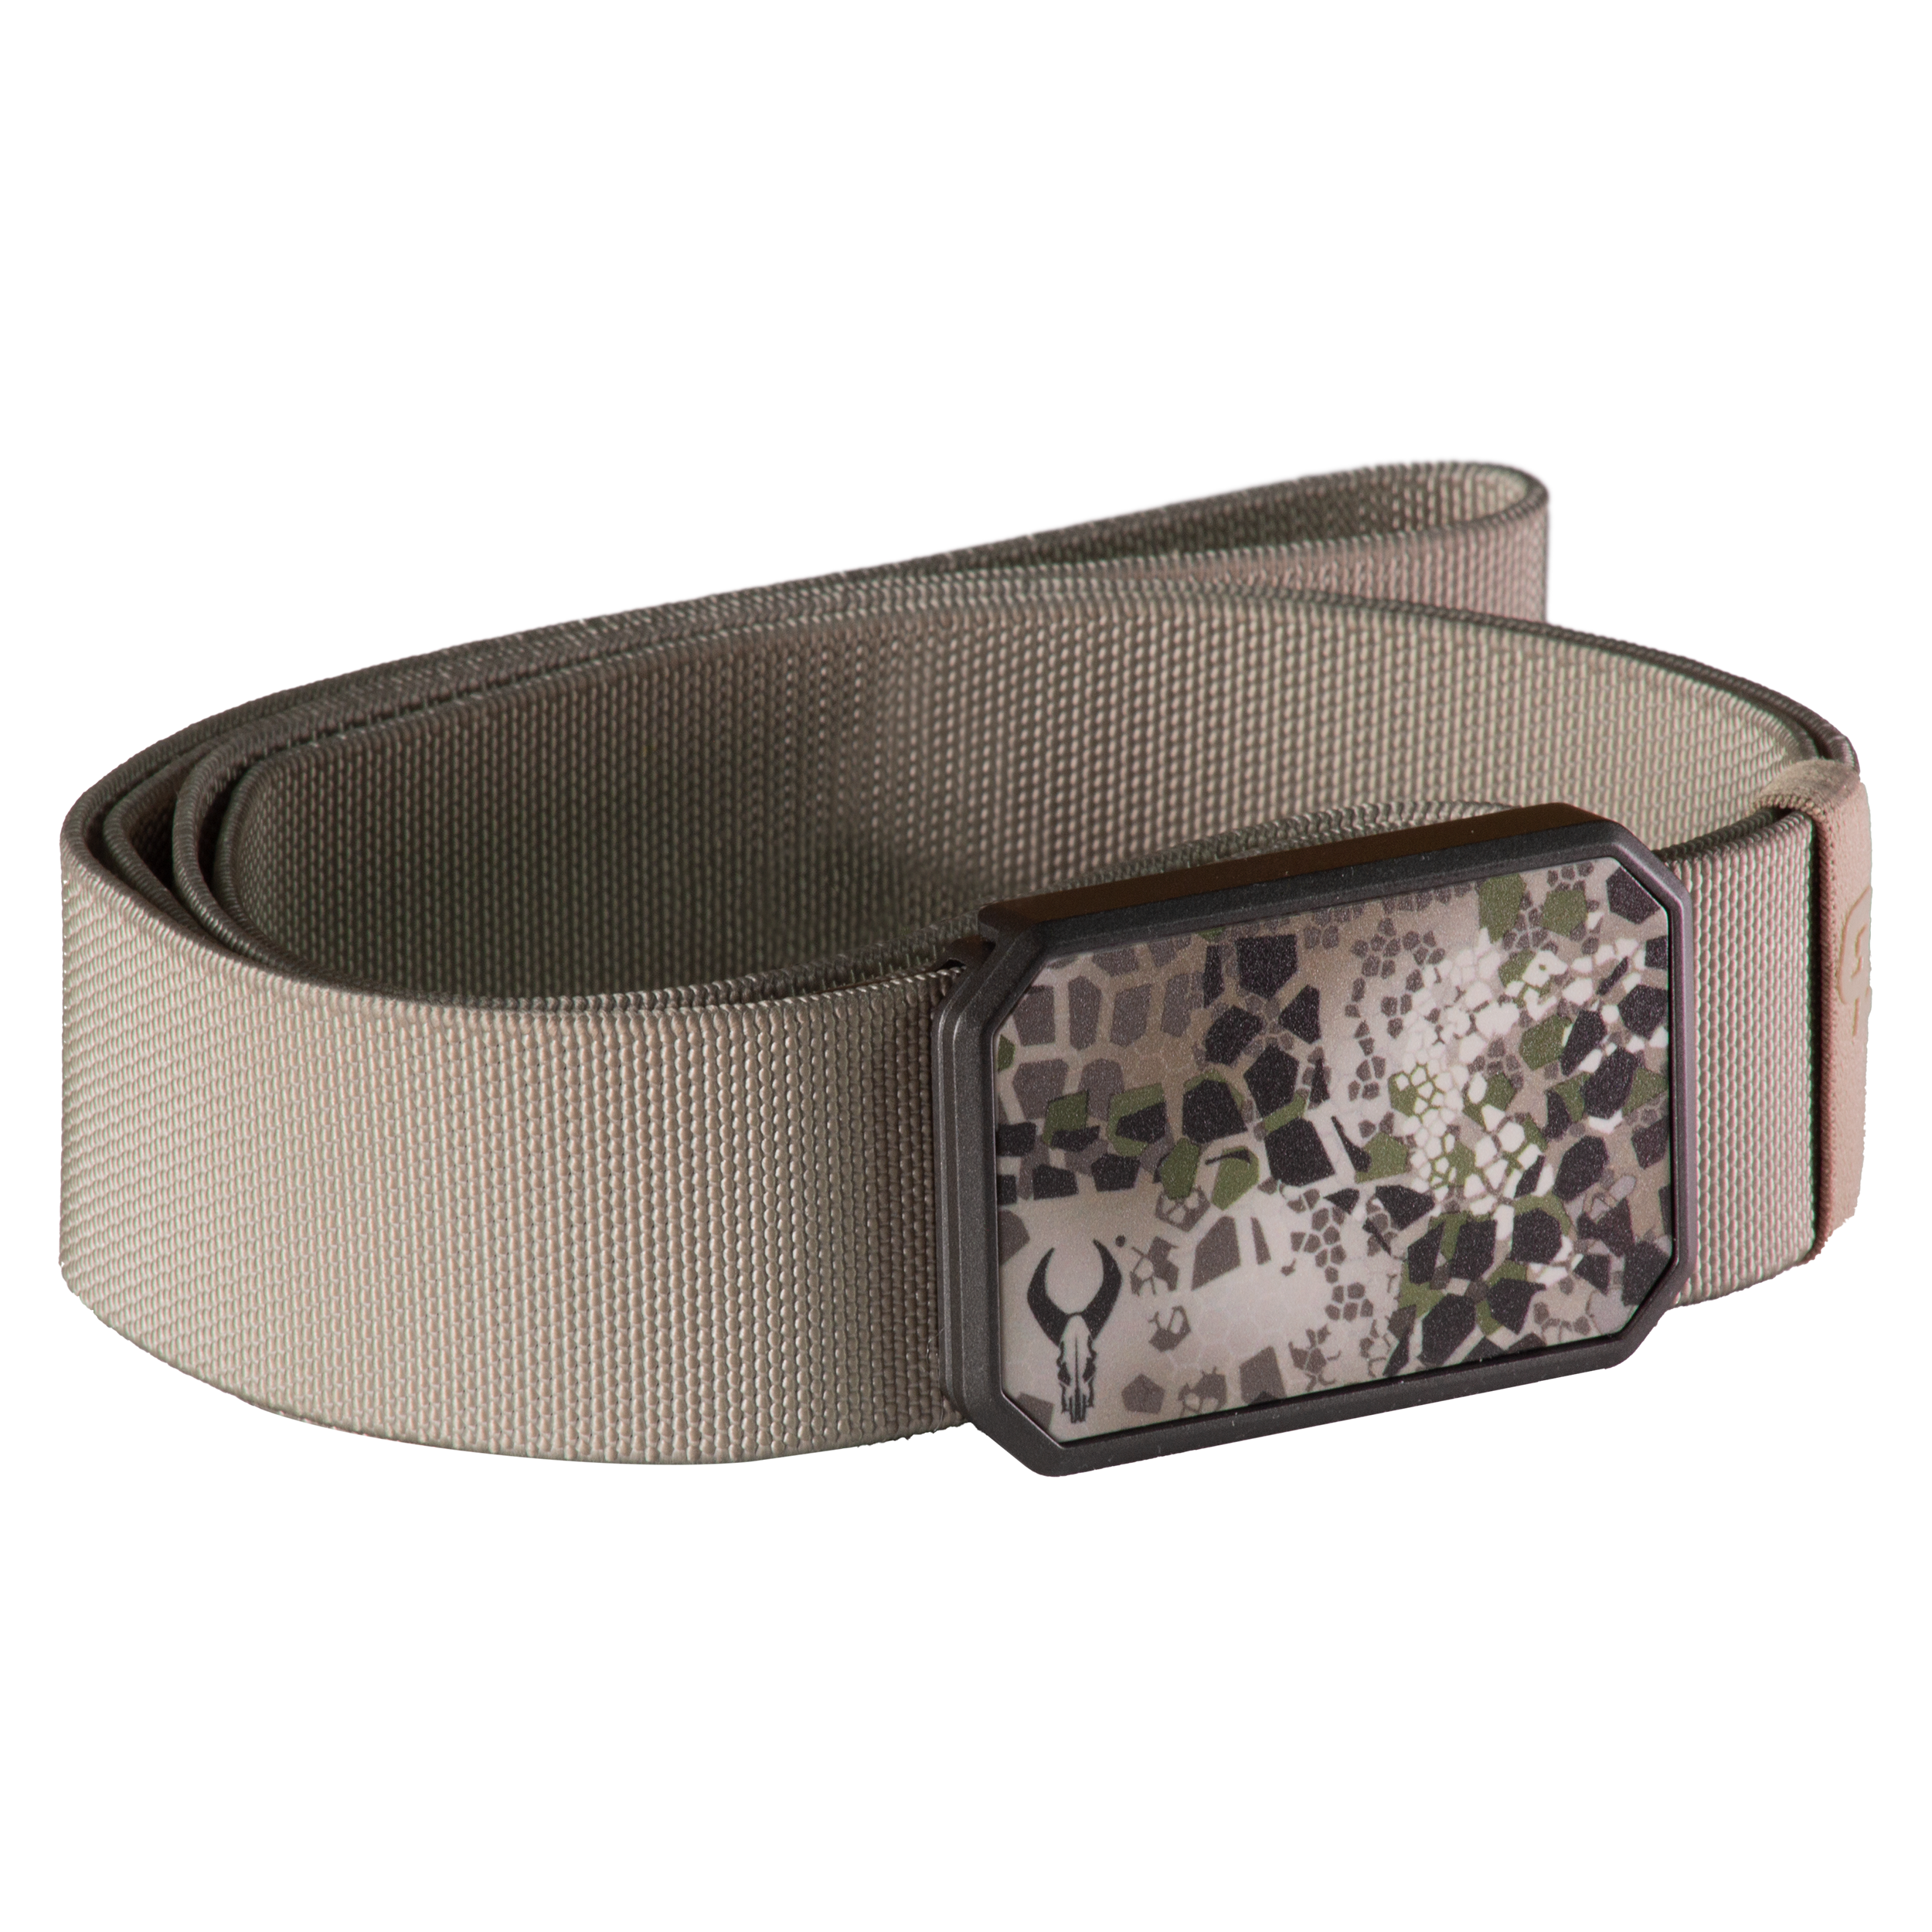 Groove Belt In Approach Camo - Hunting Accessories | Badlands Gear